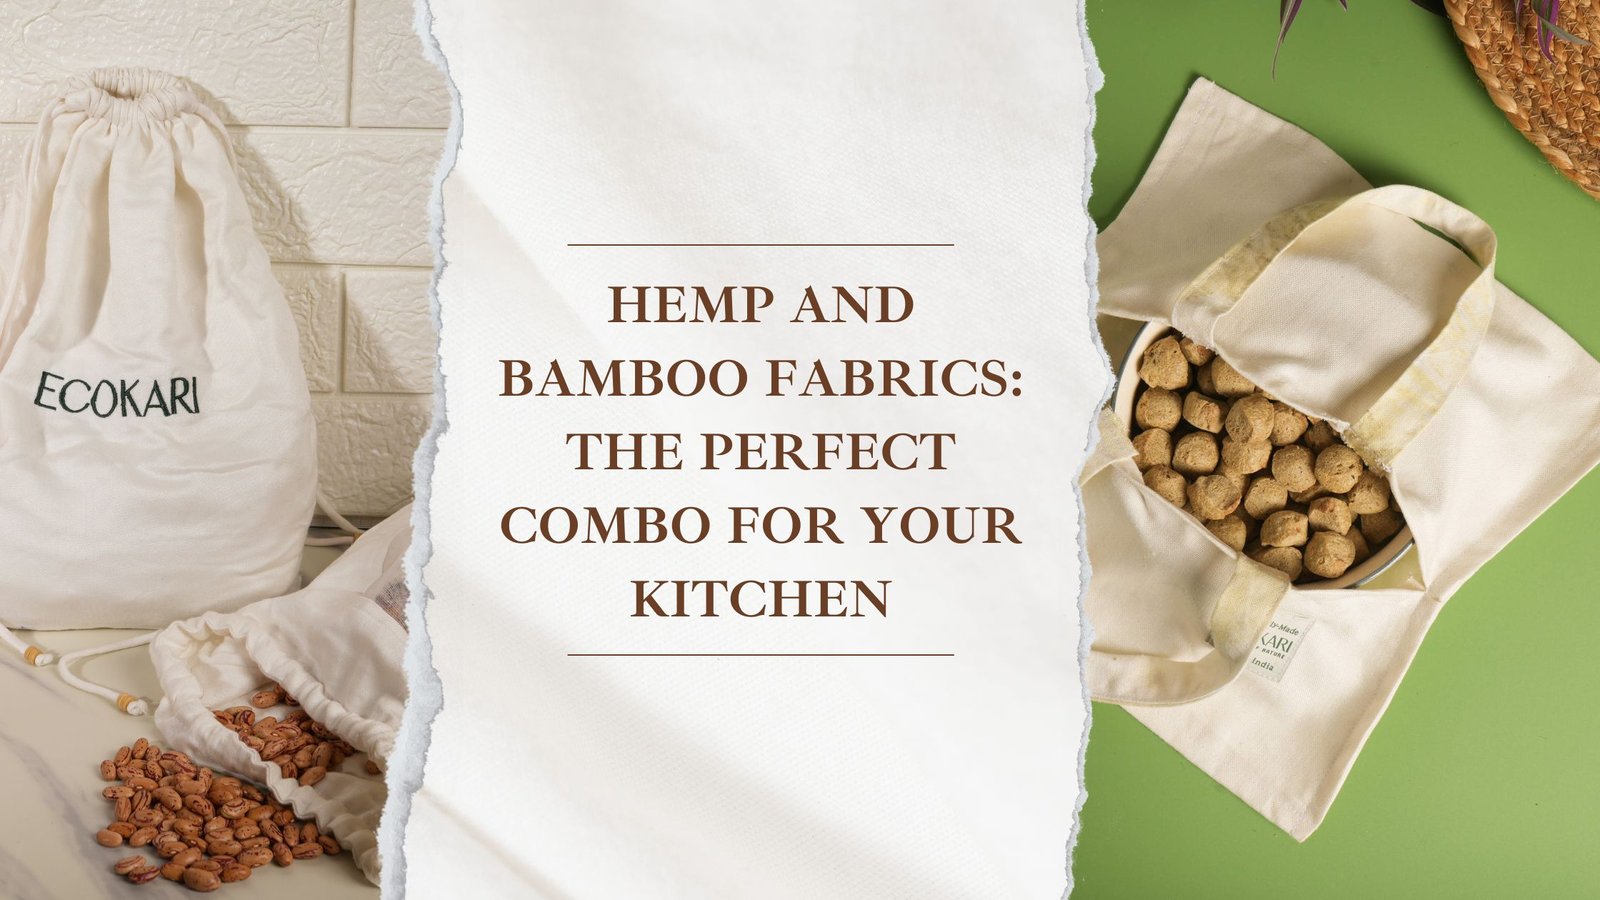 Hemp and Bamboo Fabrics: The Perfect Combo for Your Kitchen